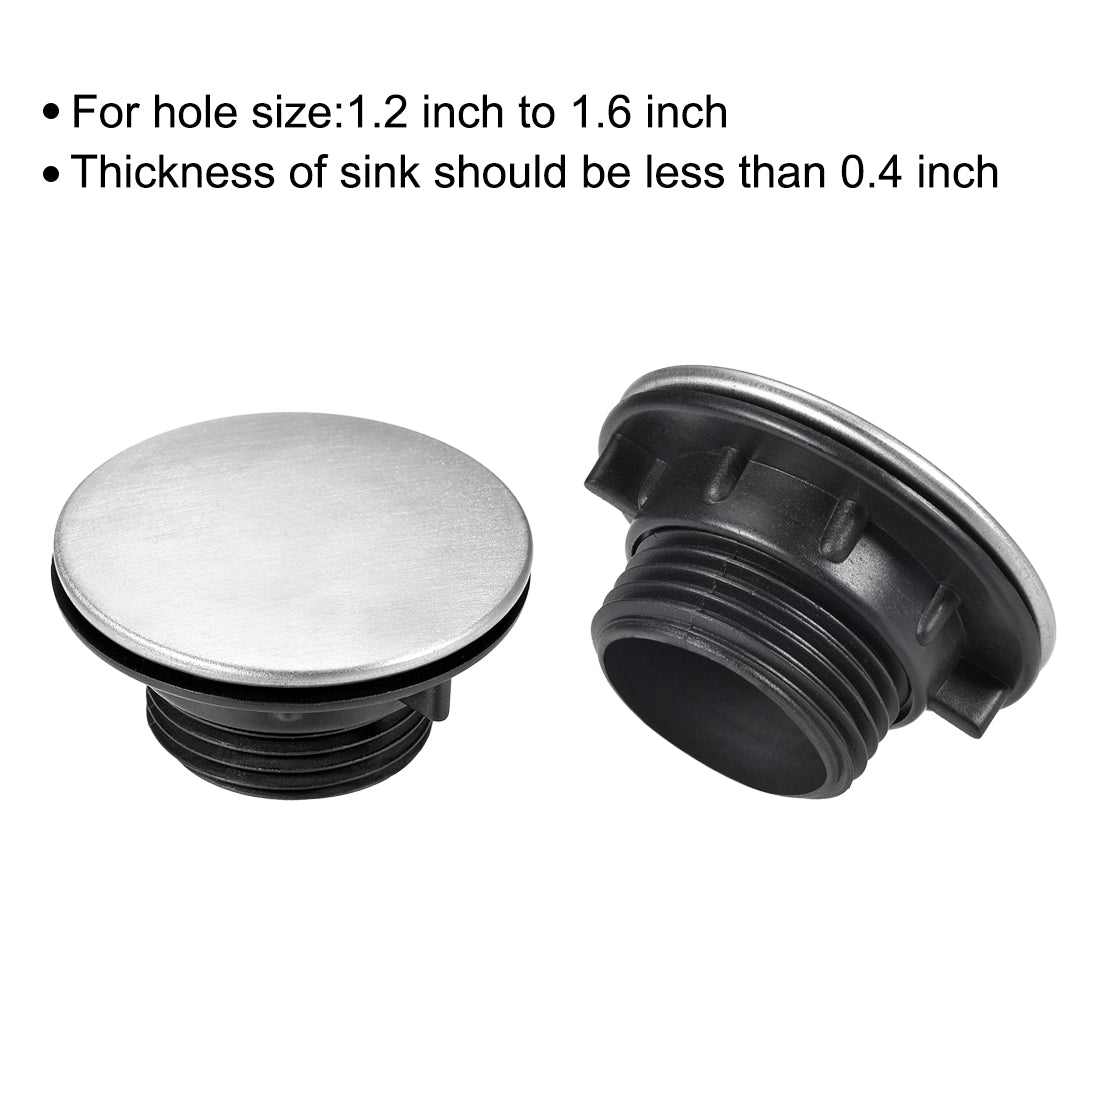 uxcell Uxcell Faucet Hole Cover for Dia 1.2 to 1.6 Inch, Kitchen Sink Tap Hole Cover 304 Stainless Steel